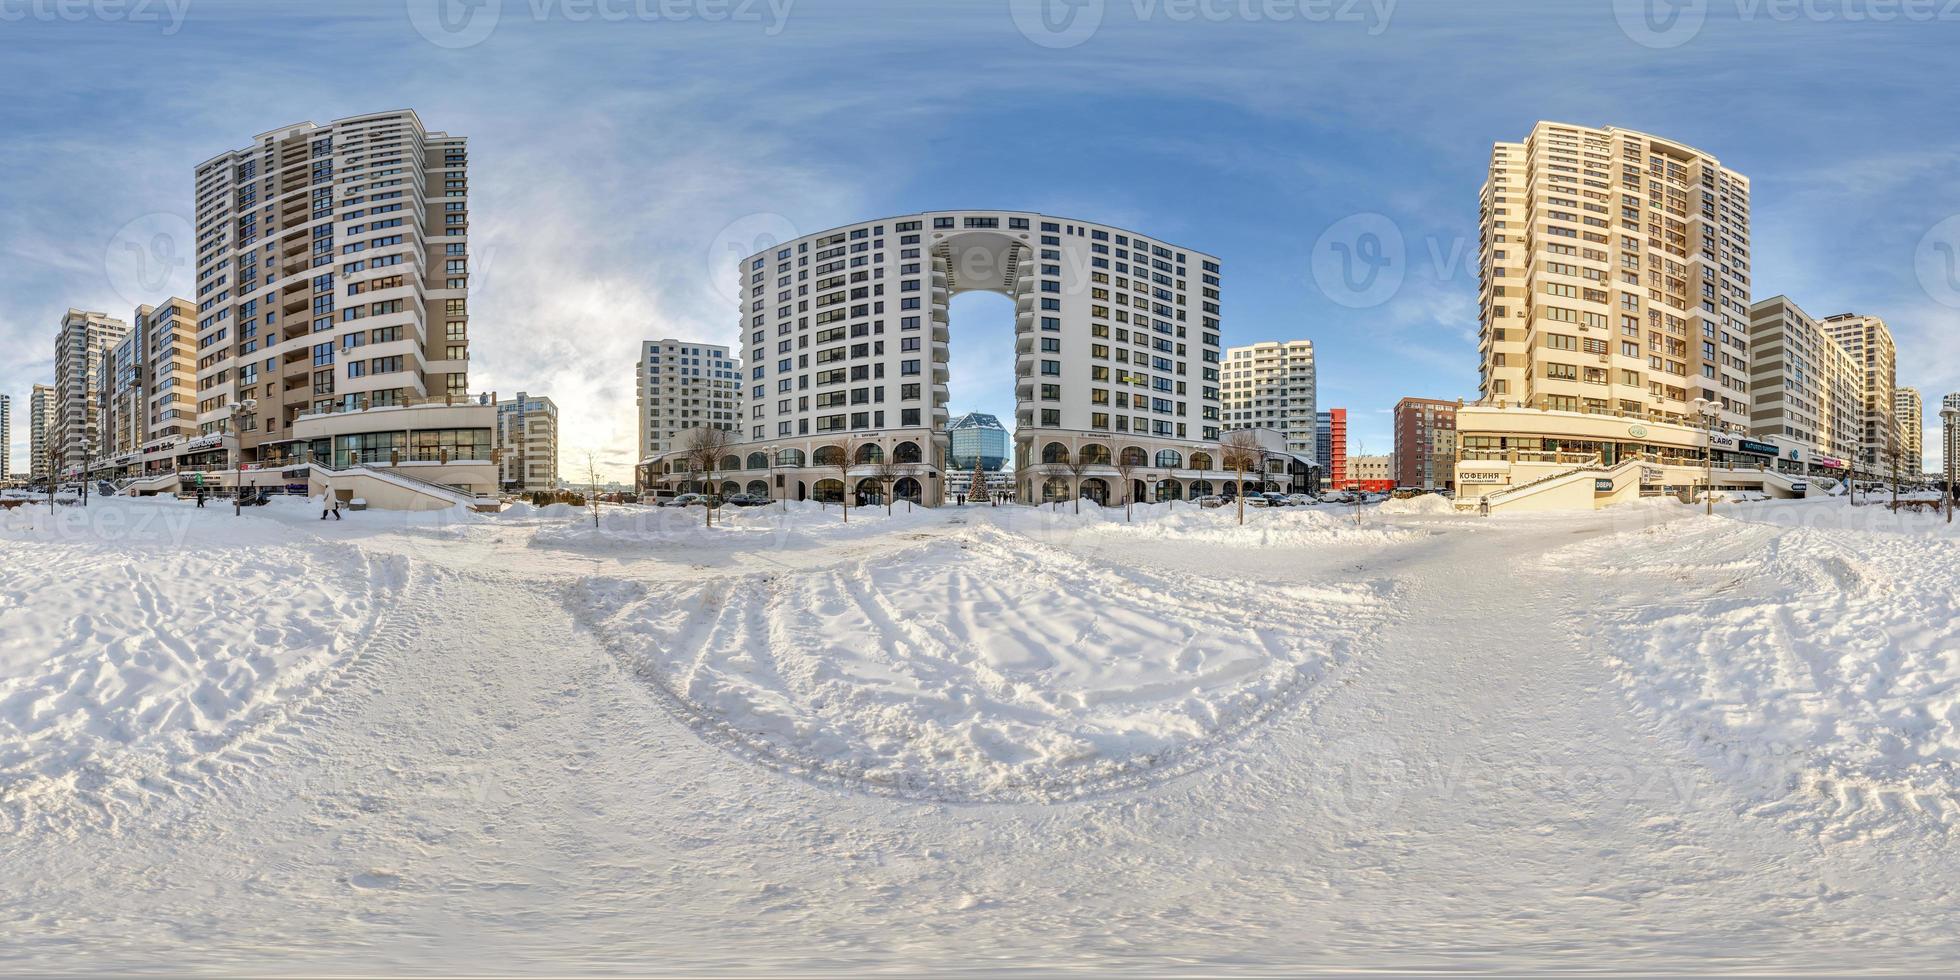 full seamless spherical winter hdri panorama 360 near skyscraper multistory buildings of residential quarter with snow in equirectangular projection photo